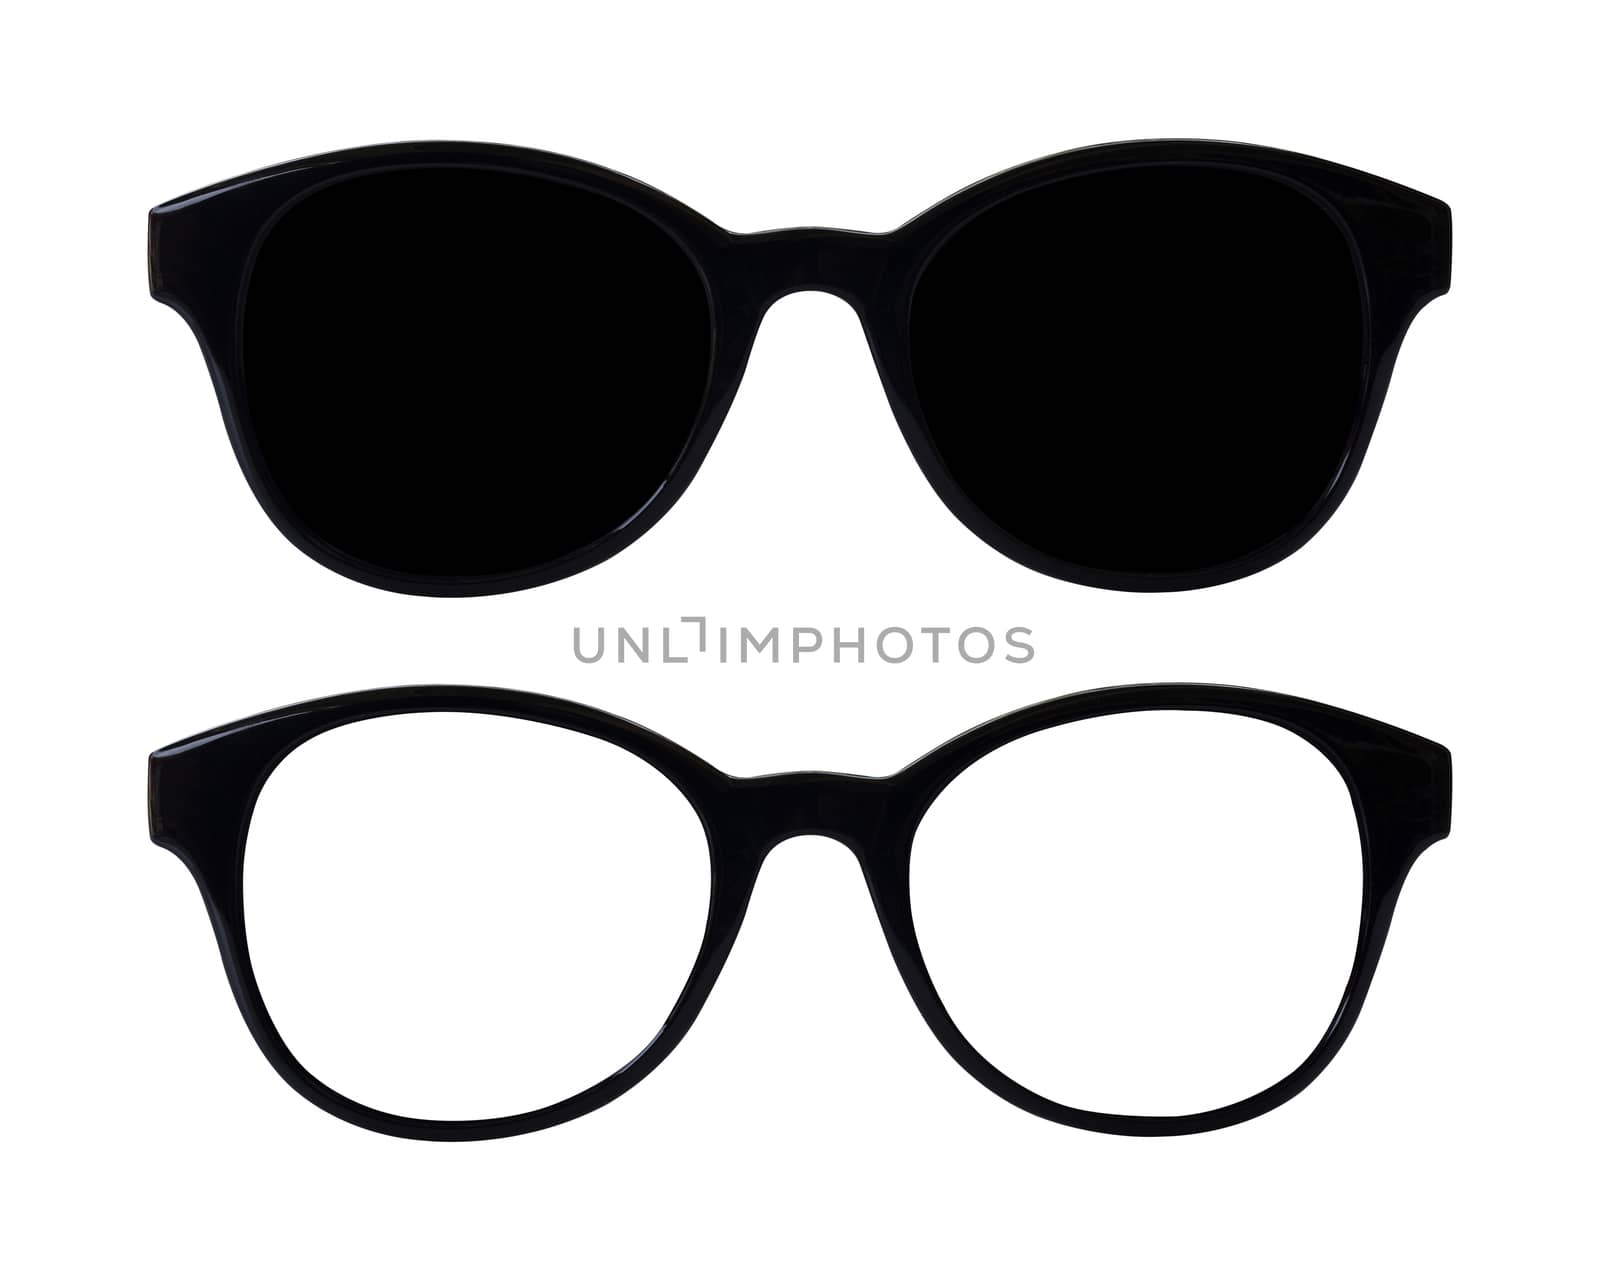 Isolate glasses on white background, vintage and retro